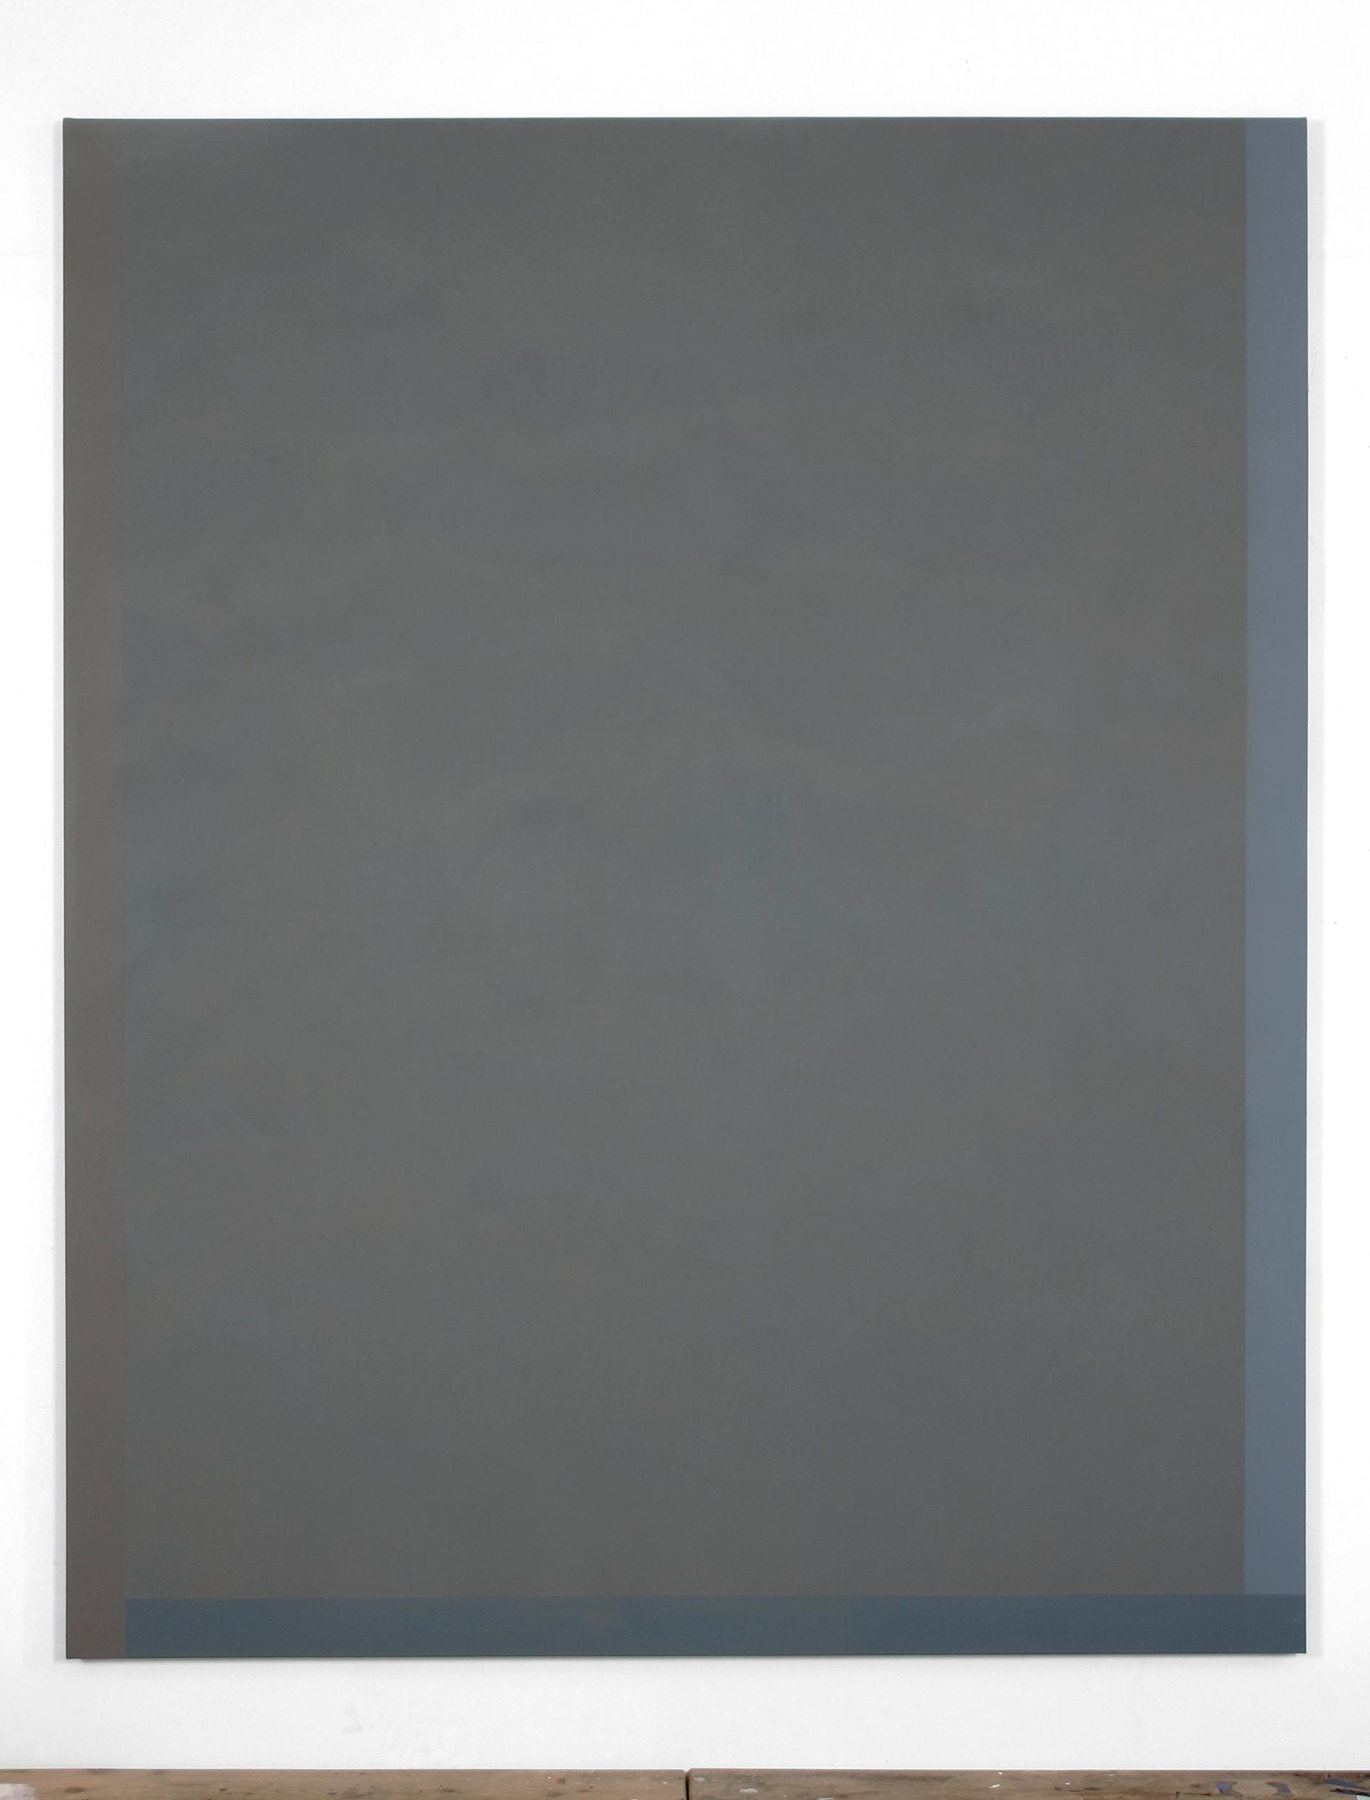 A painting with major portion of grey and two stripes of blue on the bottom and right edges of the canvas